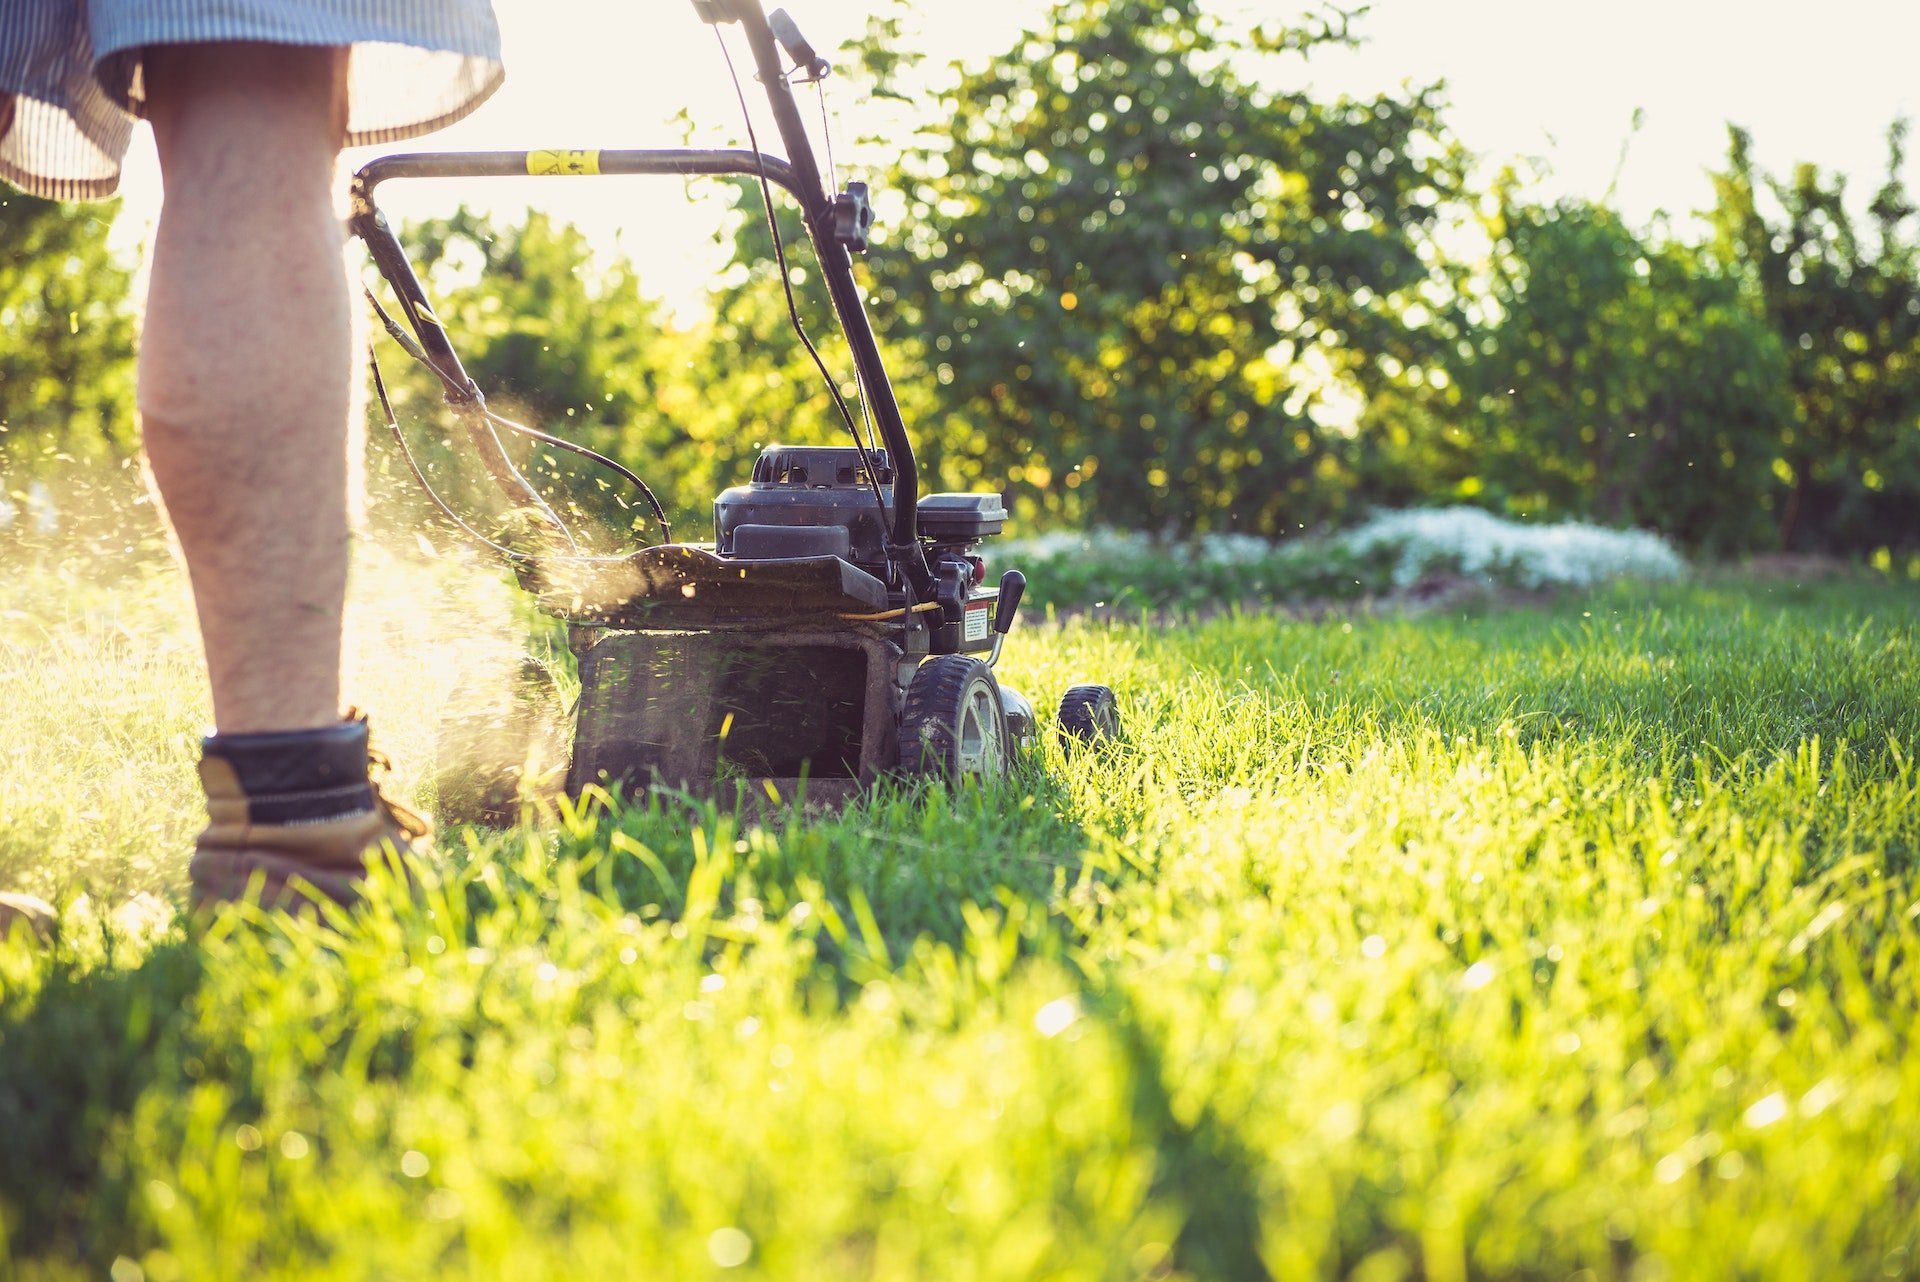 5 Lawn Care Ideas Everyone Should Follow in Fall Weather